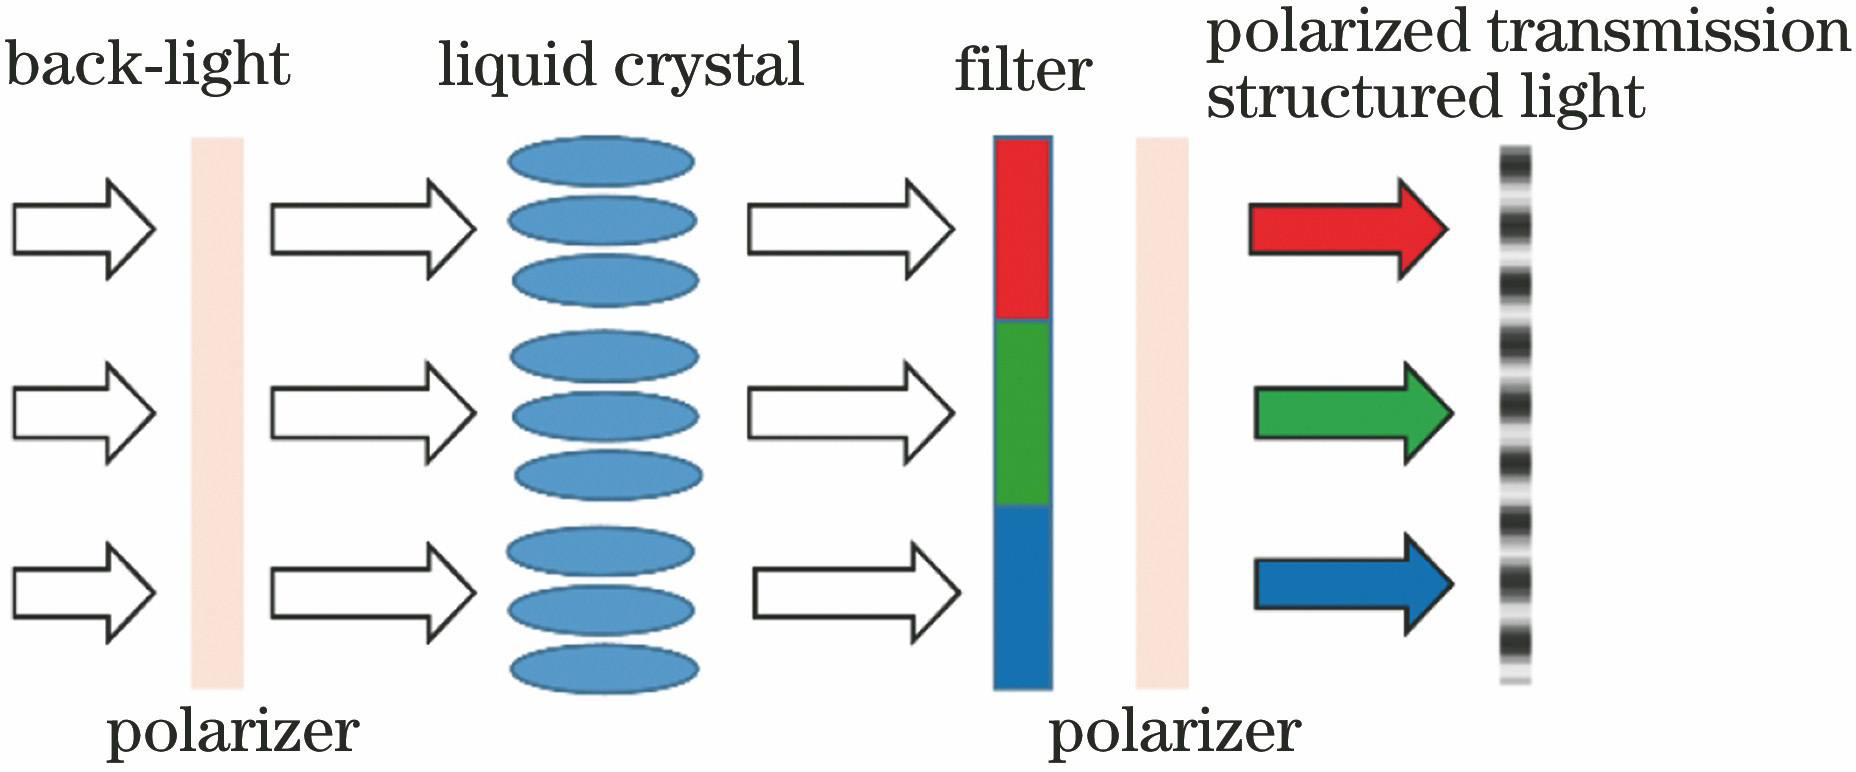 Schematic of generation principle for polarized transmission structured light